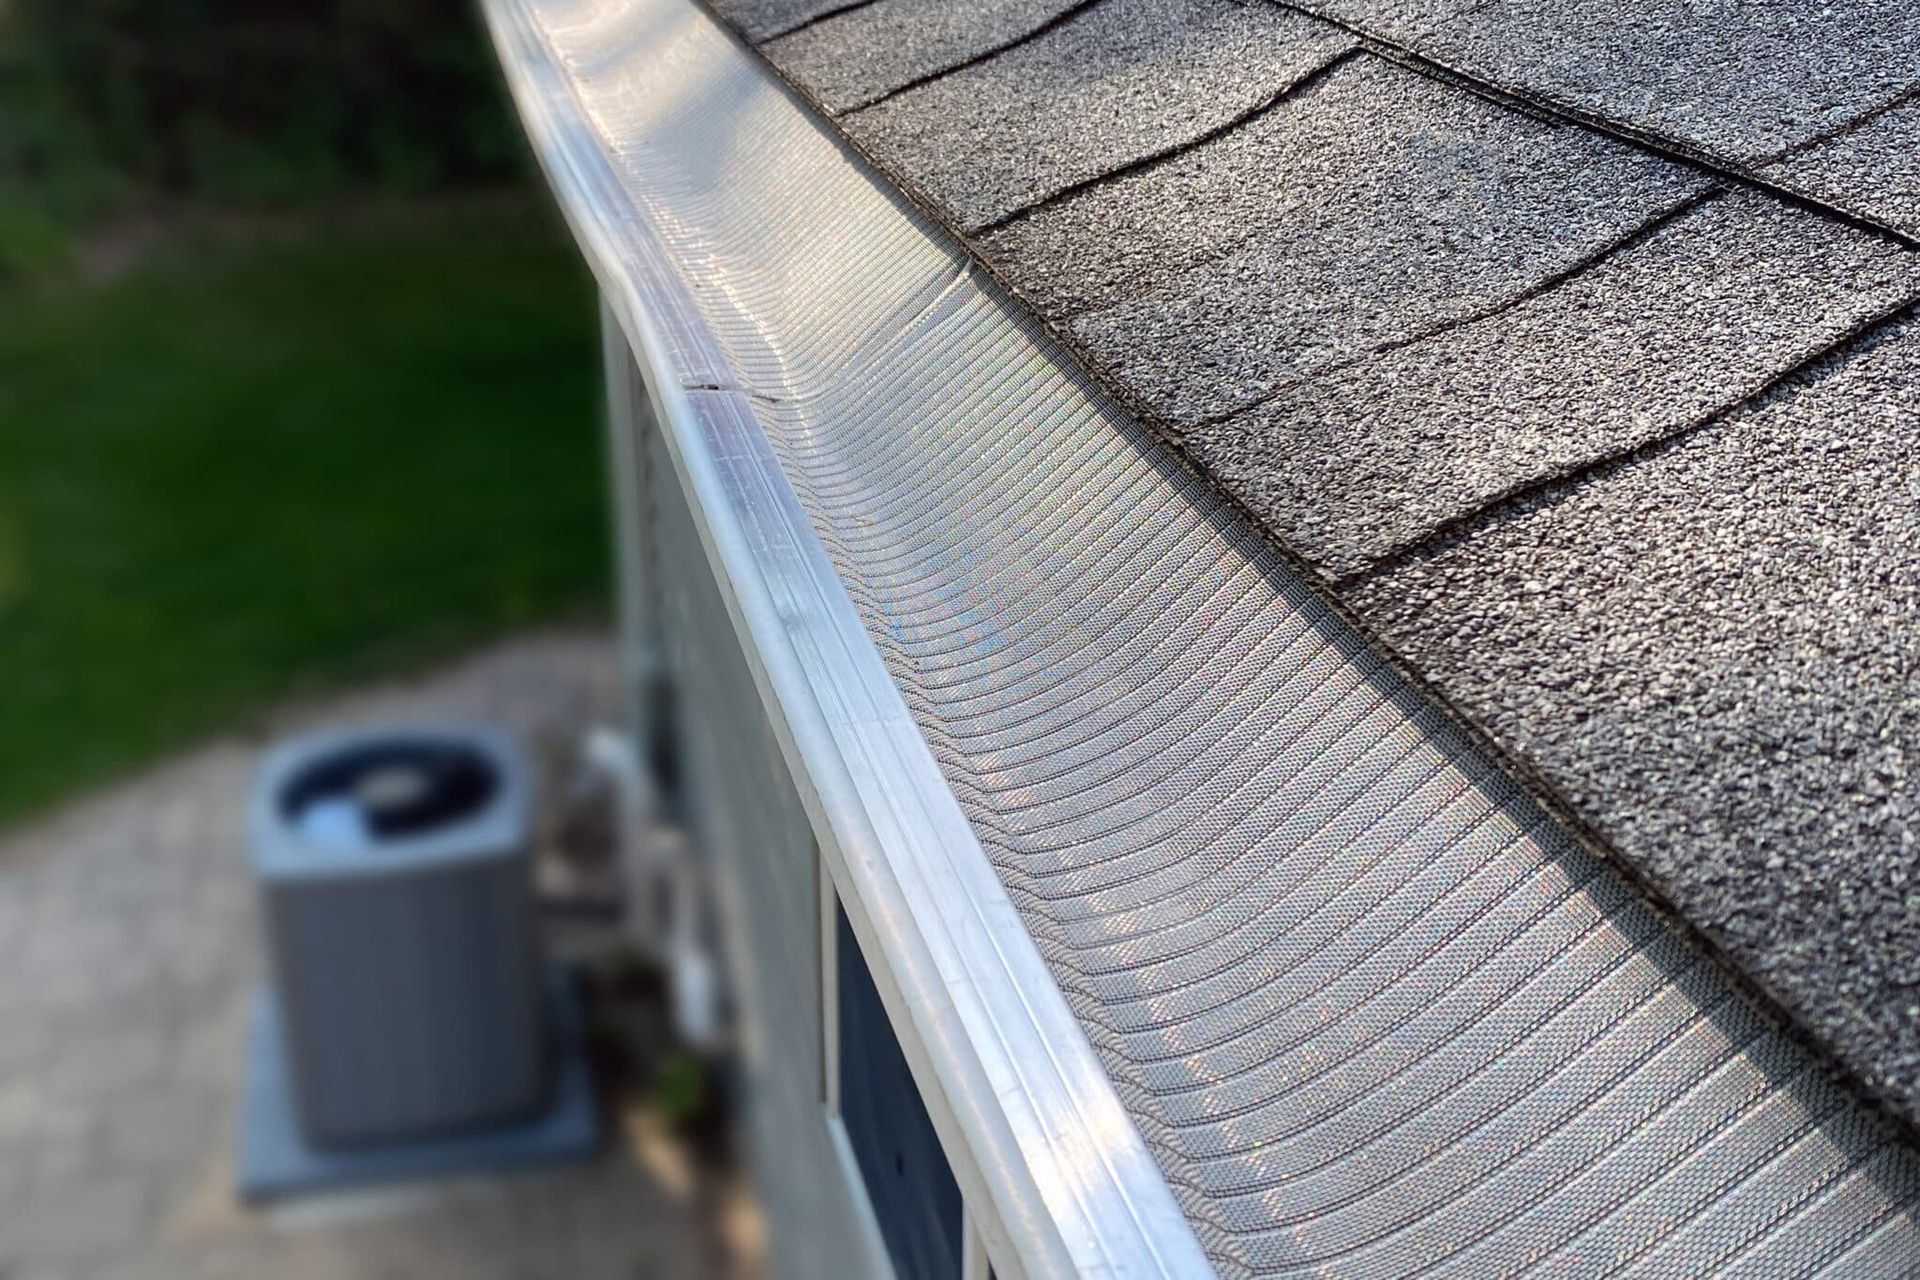 A gutter guard installed on a residential roof.